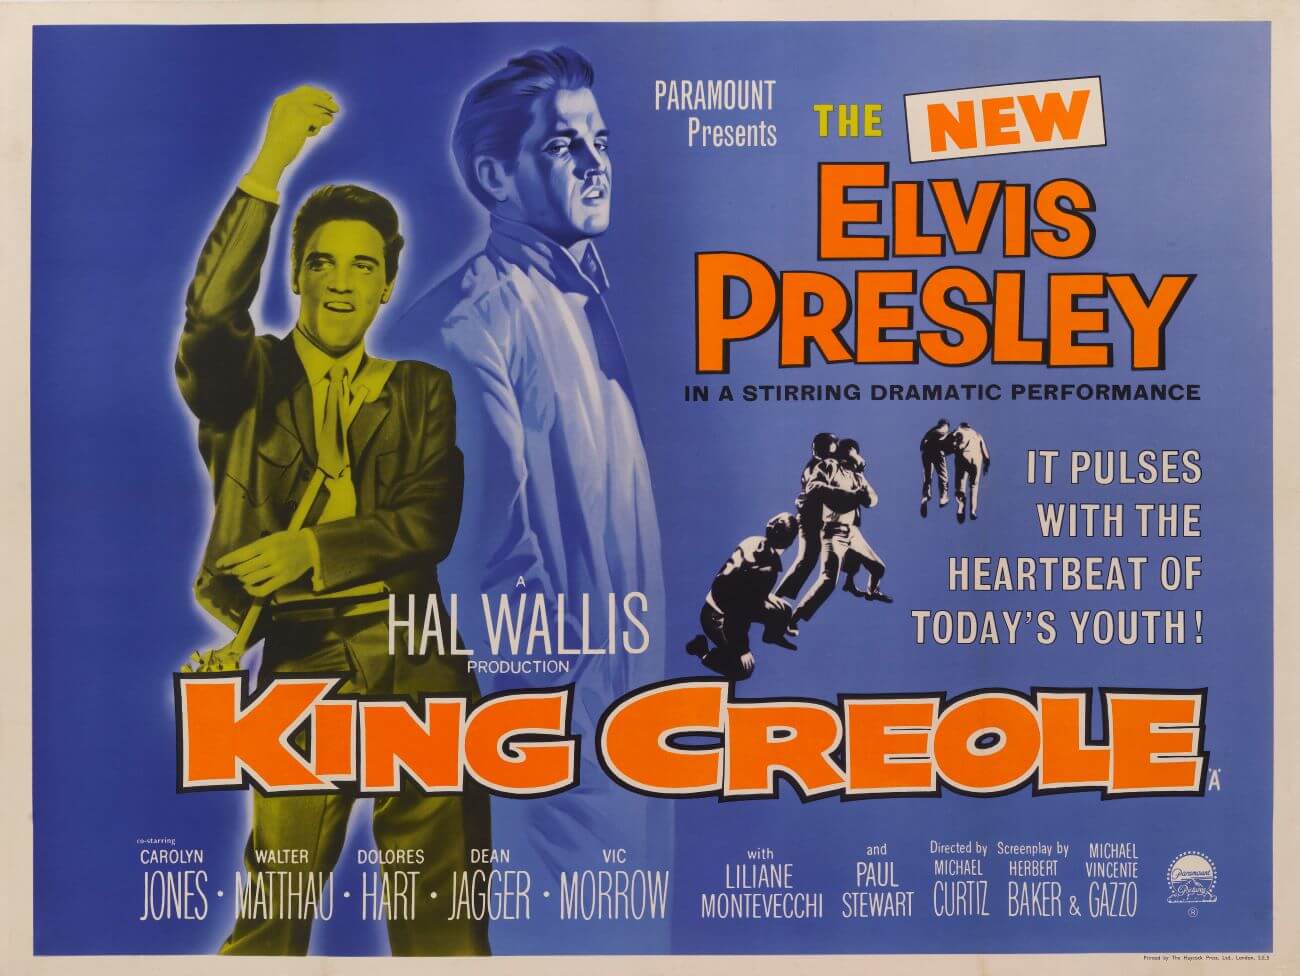 An image of Elvis Presley dancing and standing at a side profile on the poster for "King Creole."